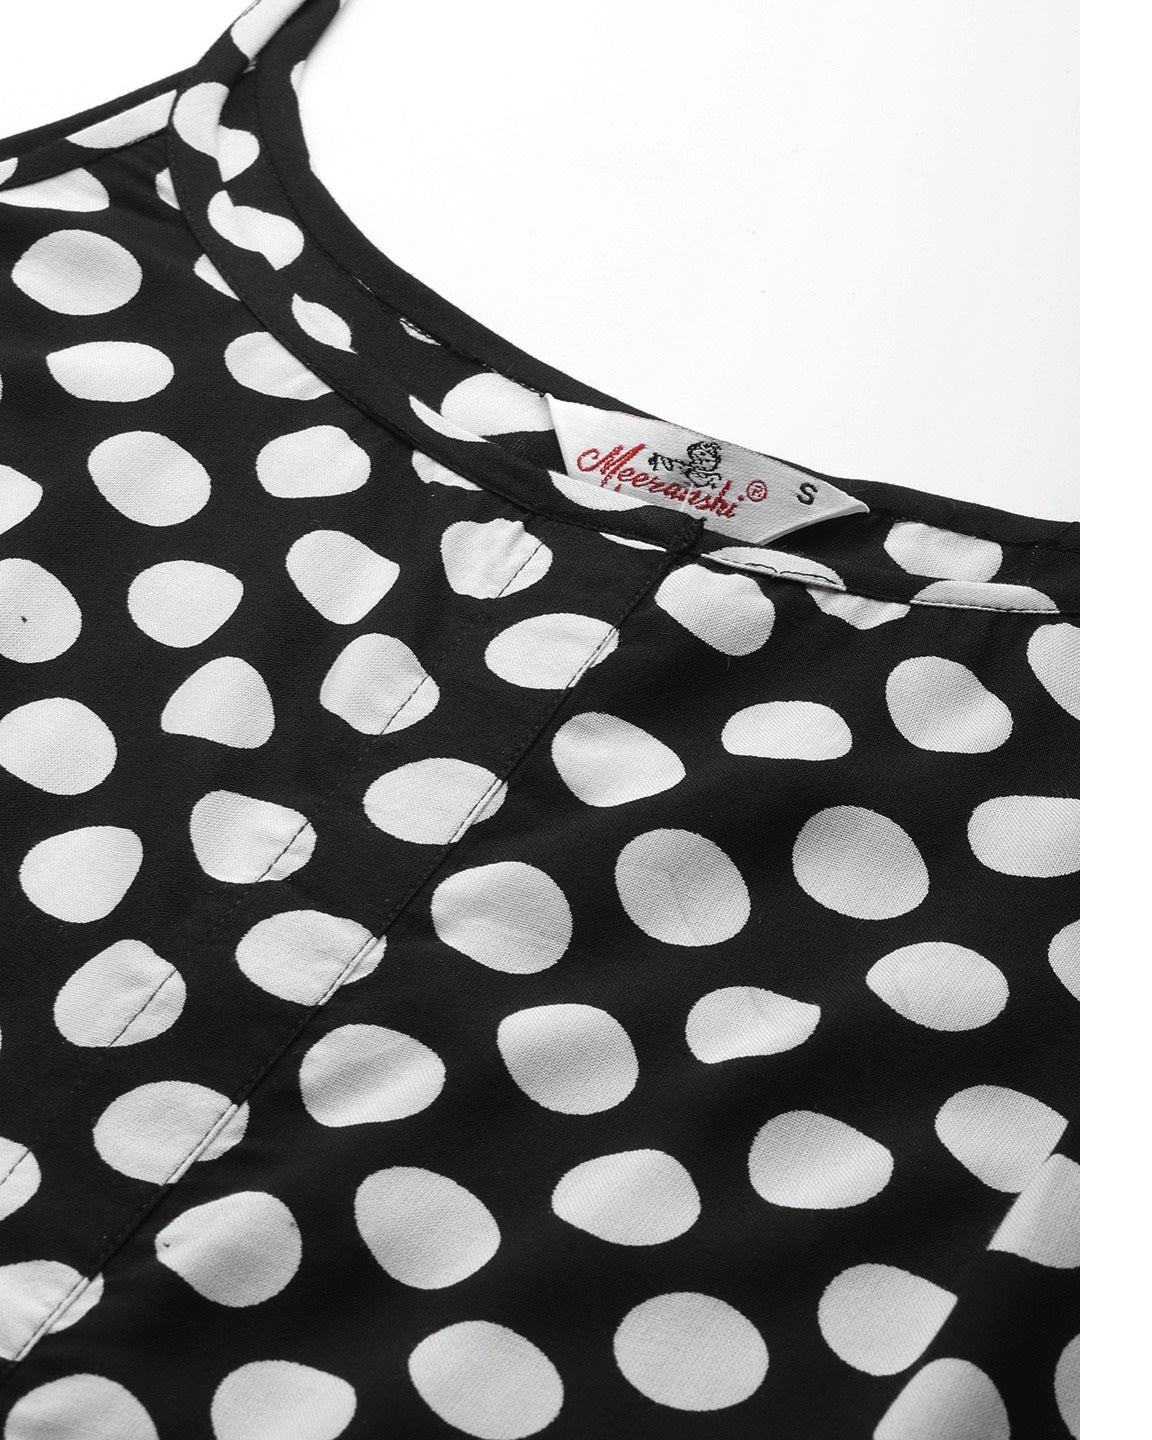 Black and White Polka Dots Printed Night Suit